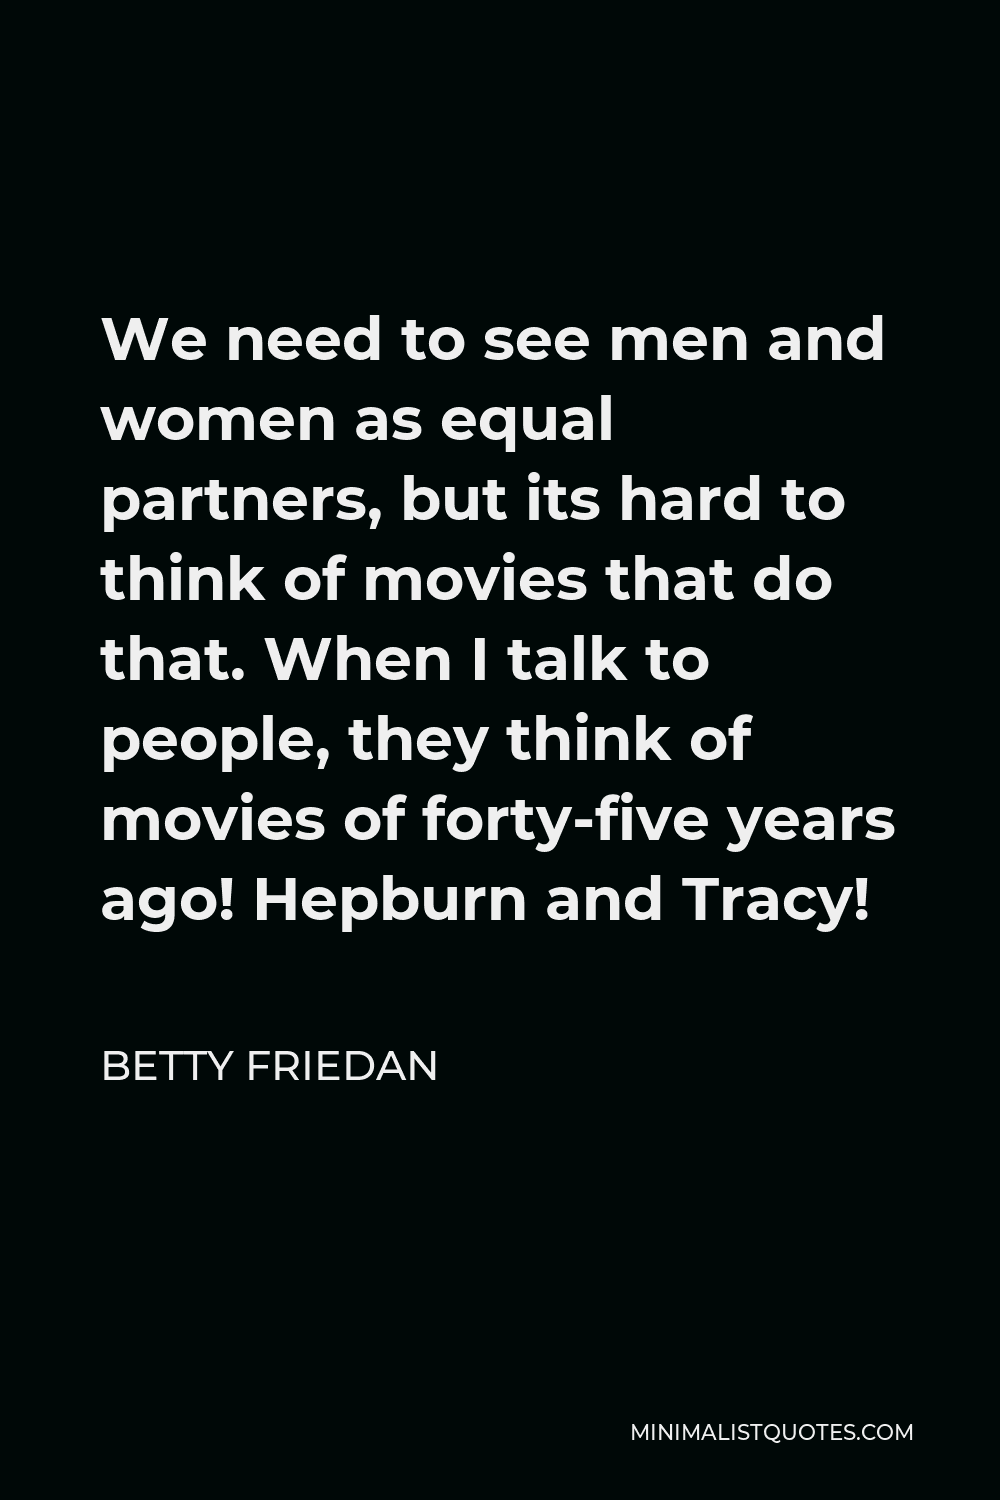 Betty Friedan Quote - We need to see men and women as equal partners, but its hard to think of movies that do that. When I talk to people, they think of movies of forty-five years ago! Hepburn and Tracy!